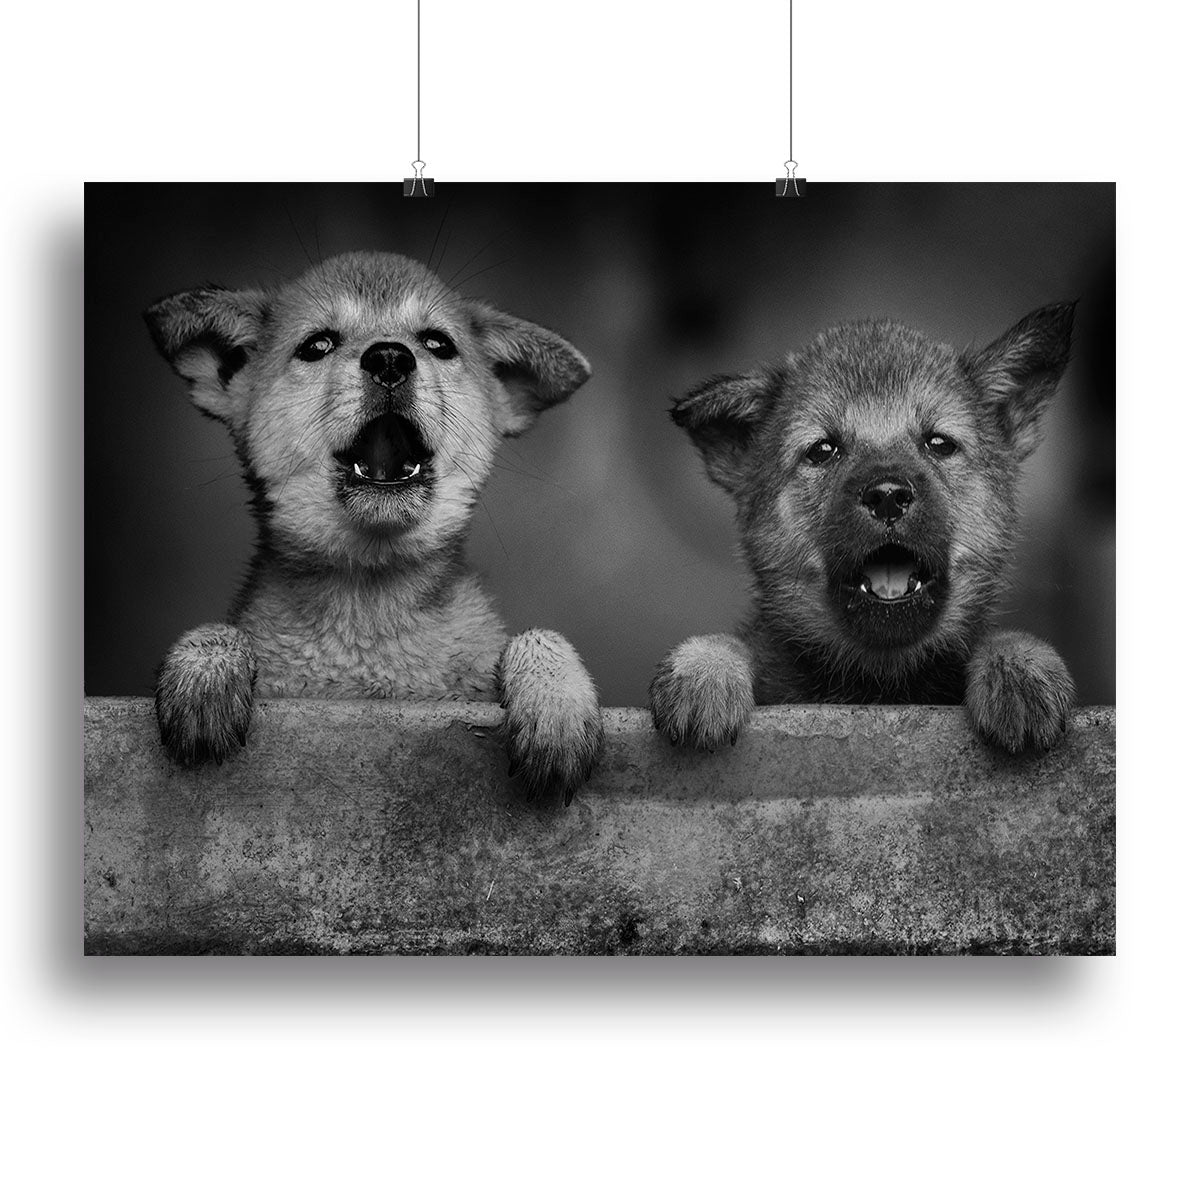 Black and White Puppies Canvas Print or Poster - 1x - 2